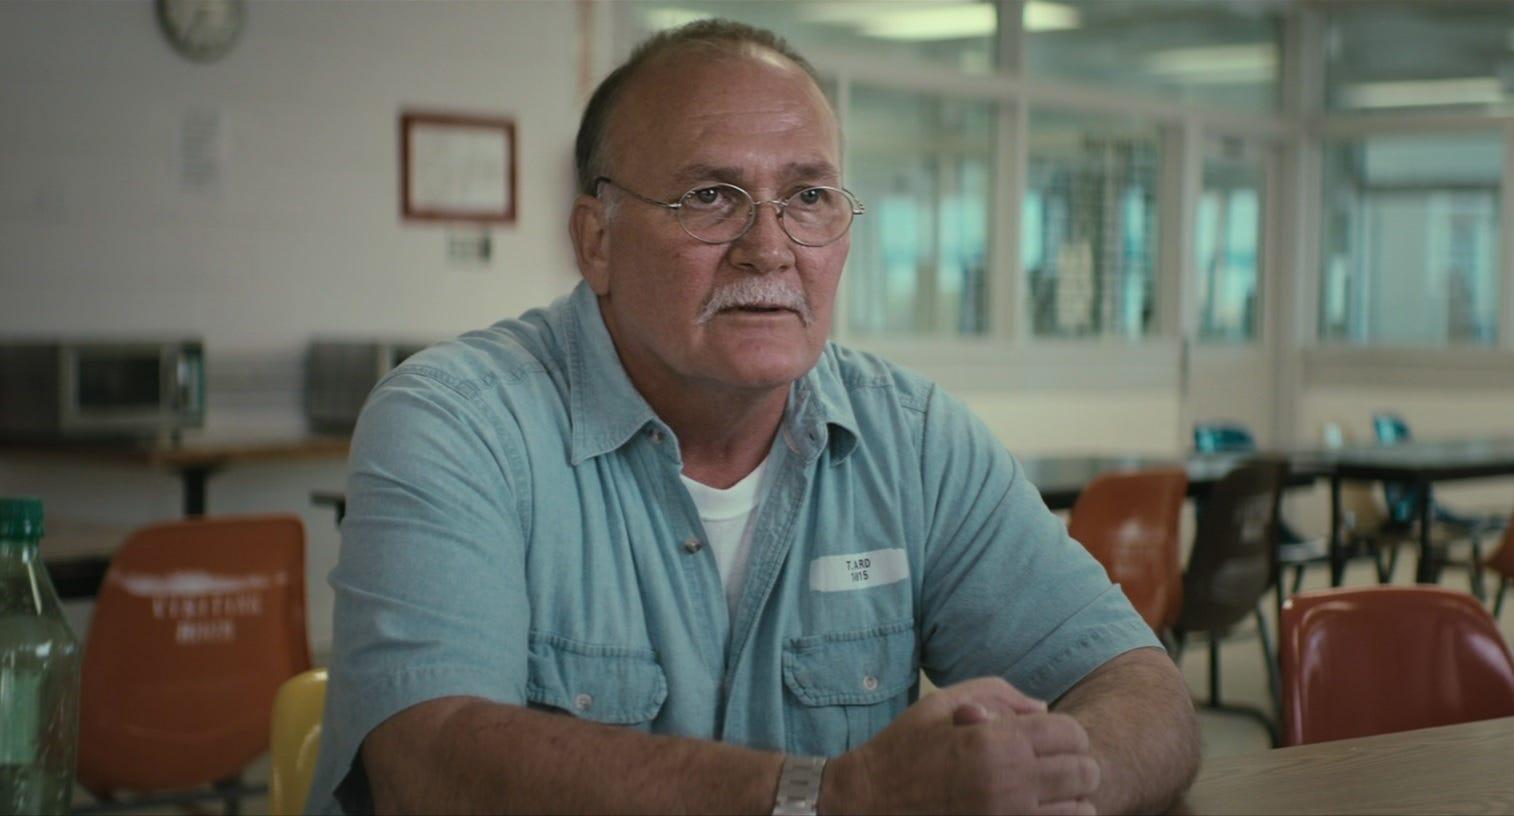 Tommy Ward is shown in this image from the Netflix documentary series, "The Innocent Man."